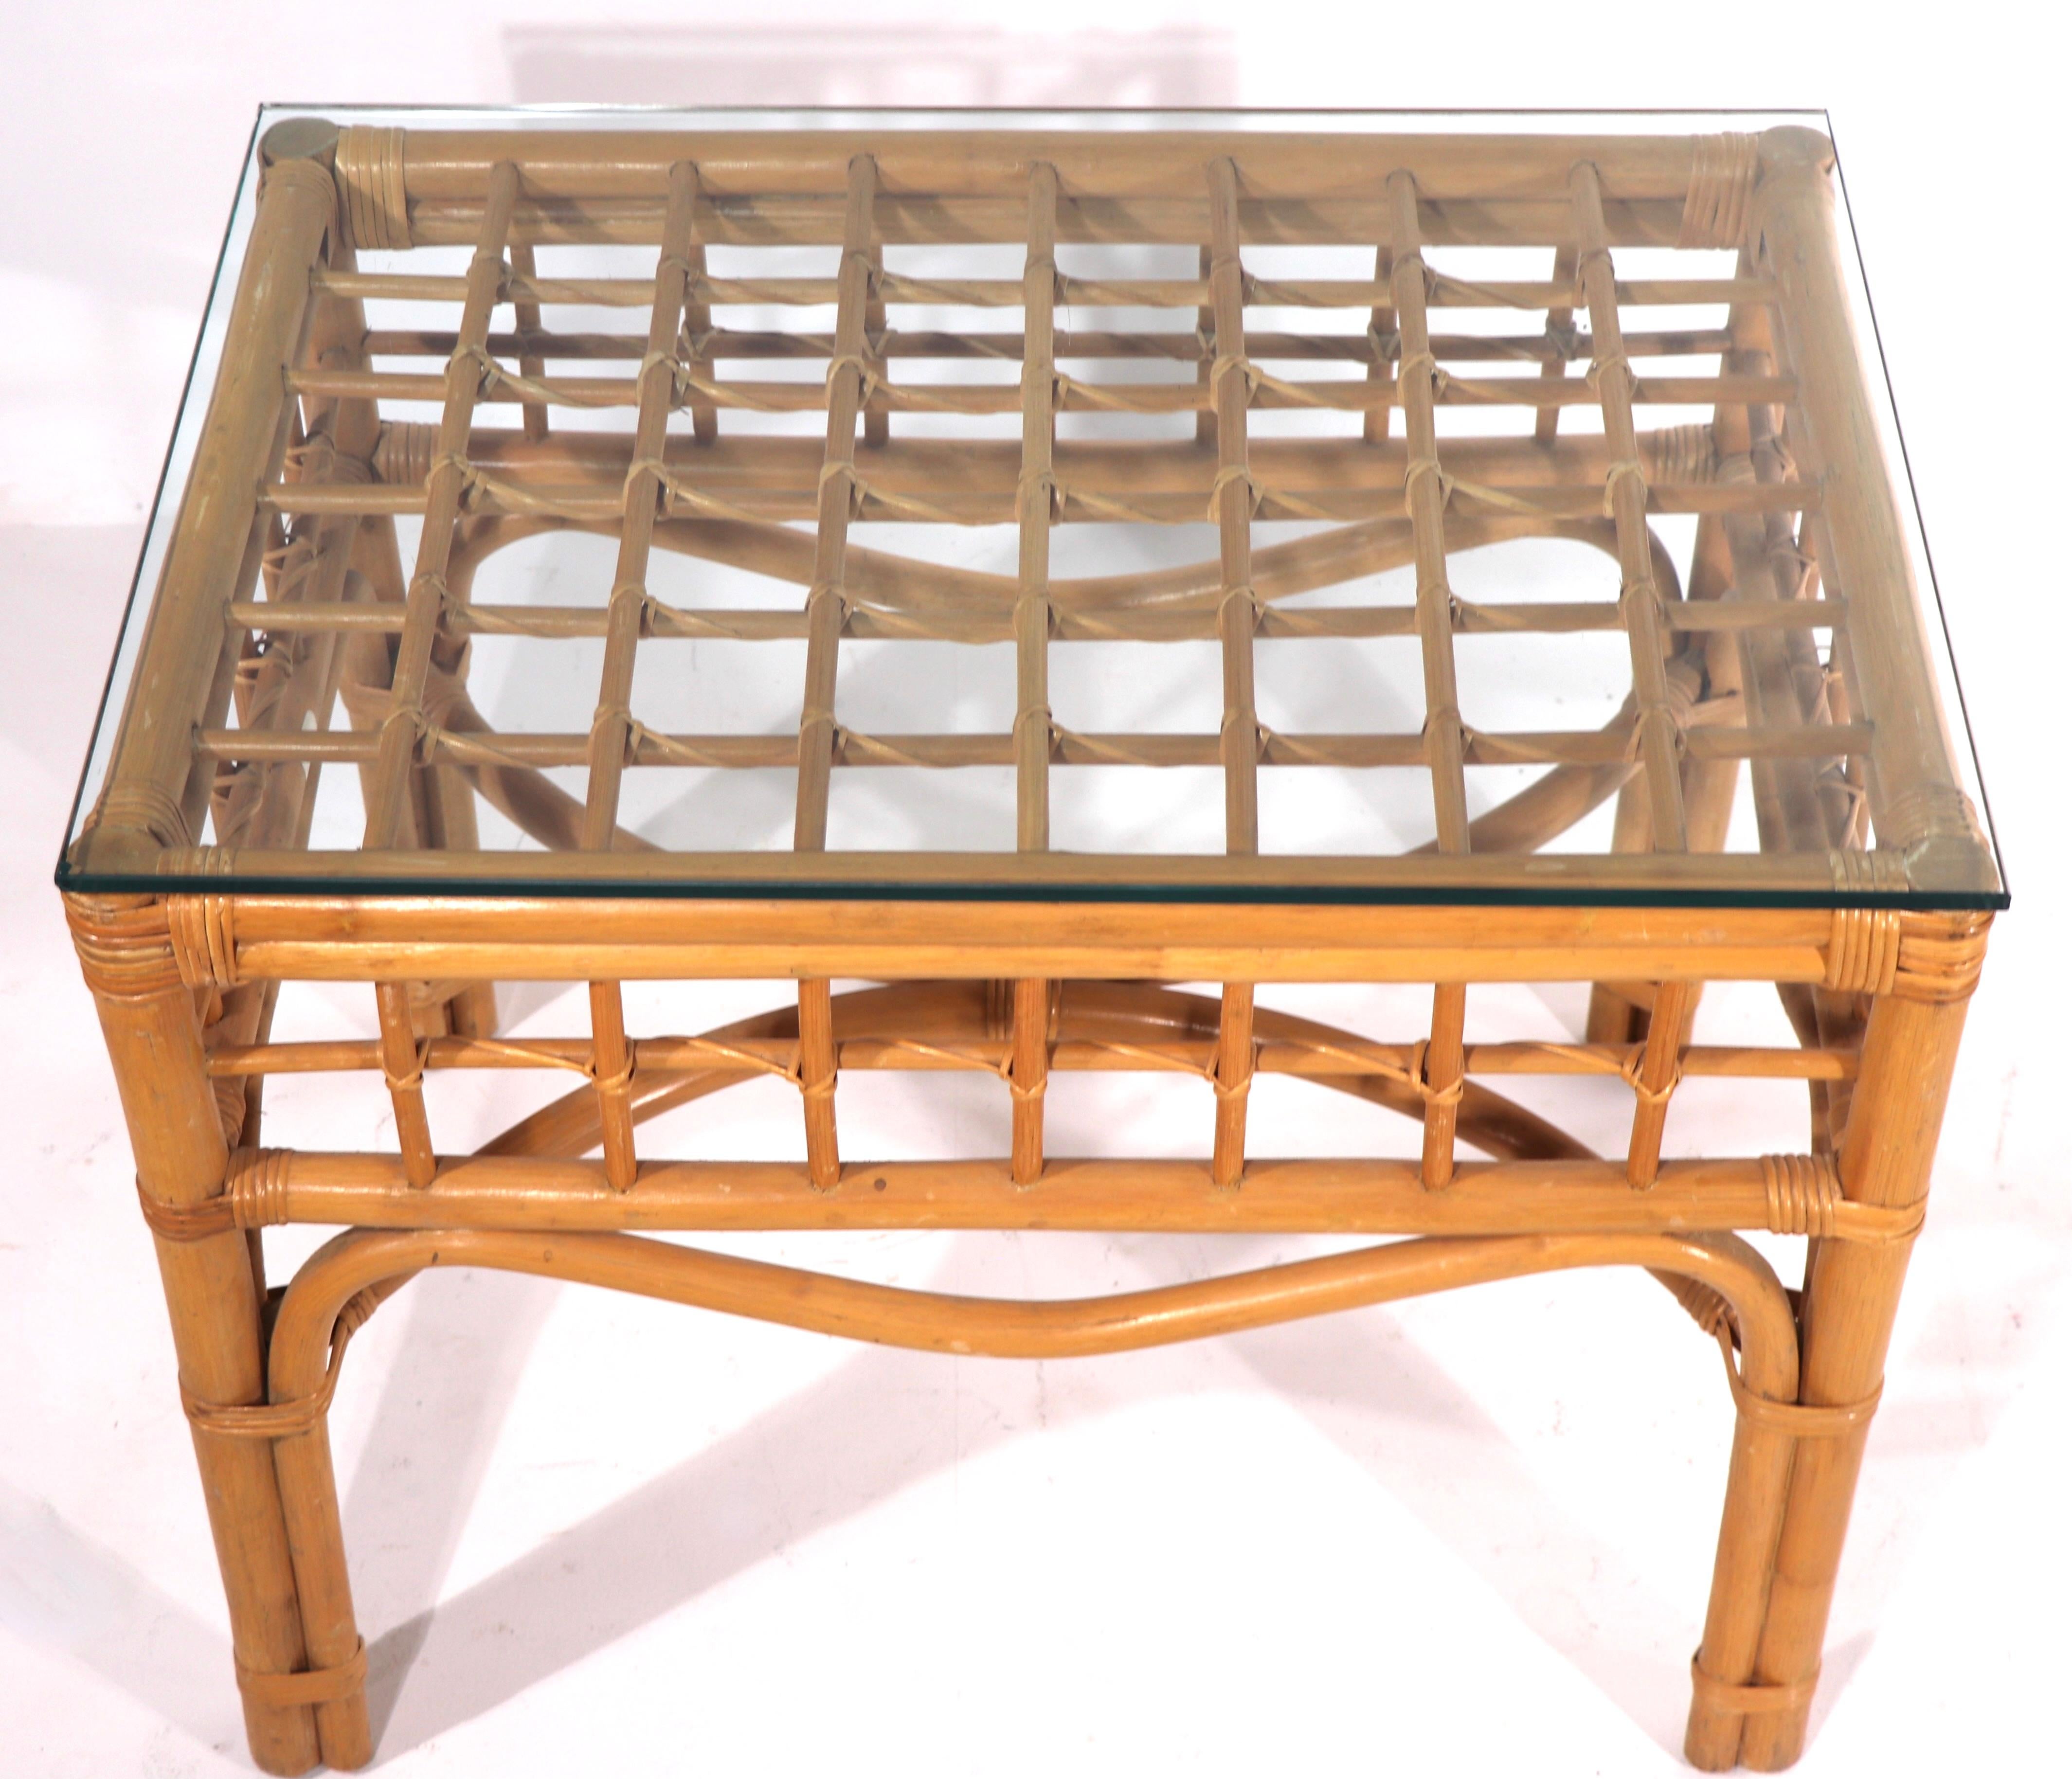 High quality and well made bamboo end, or side, table having woven wicker trim, bamboo legs, and a glass top. In the style of Olko, Link, McGuire -Ficks Reed etc. unsigned. Please view the companion bamboo pieces we have listed separately from this